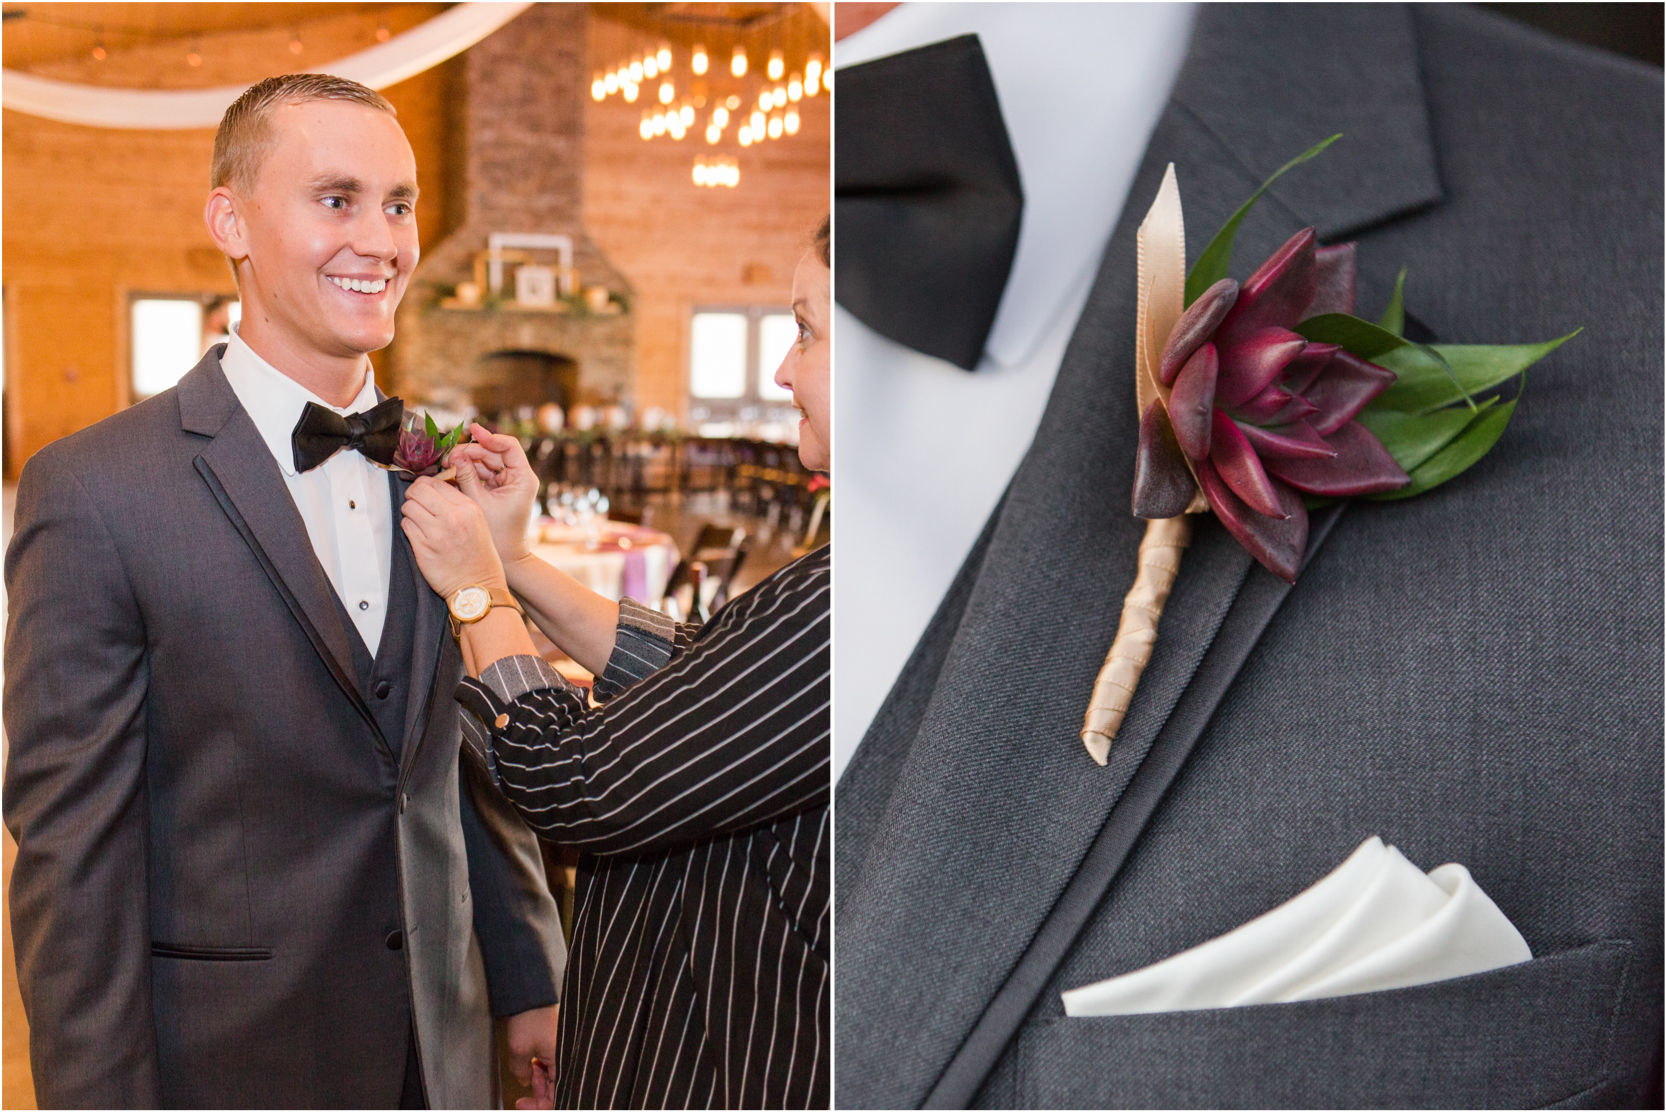 Tuckers Gap Groom Getting Ready Succulent Boutonniere Wedding Photography